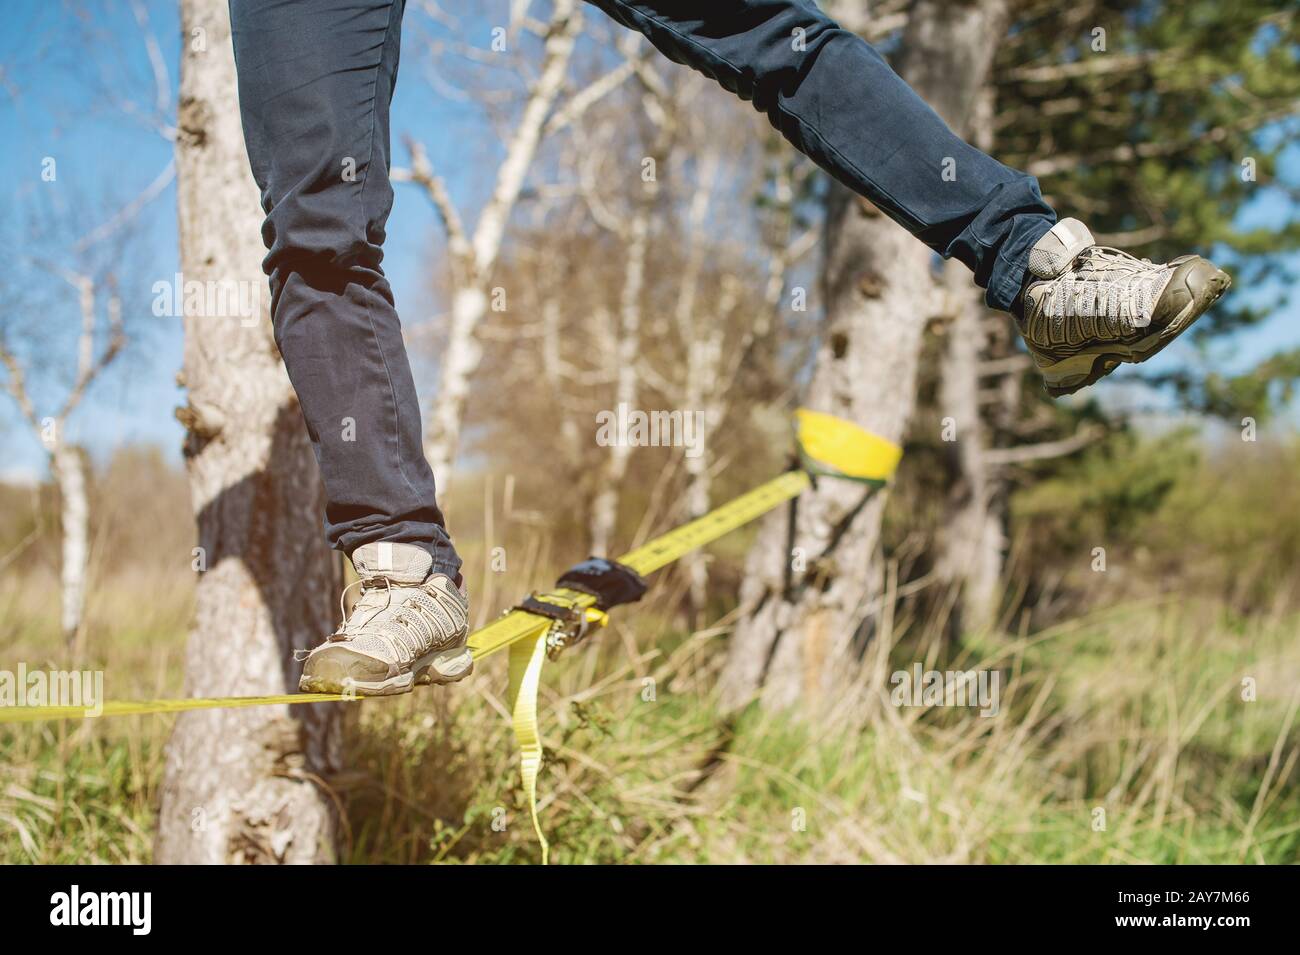 Slacklining is a practice of balancing, in which nylon or polyester fabric stretched between two anchor points is commonly used. Stock Photo